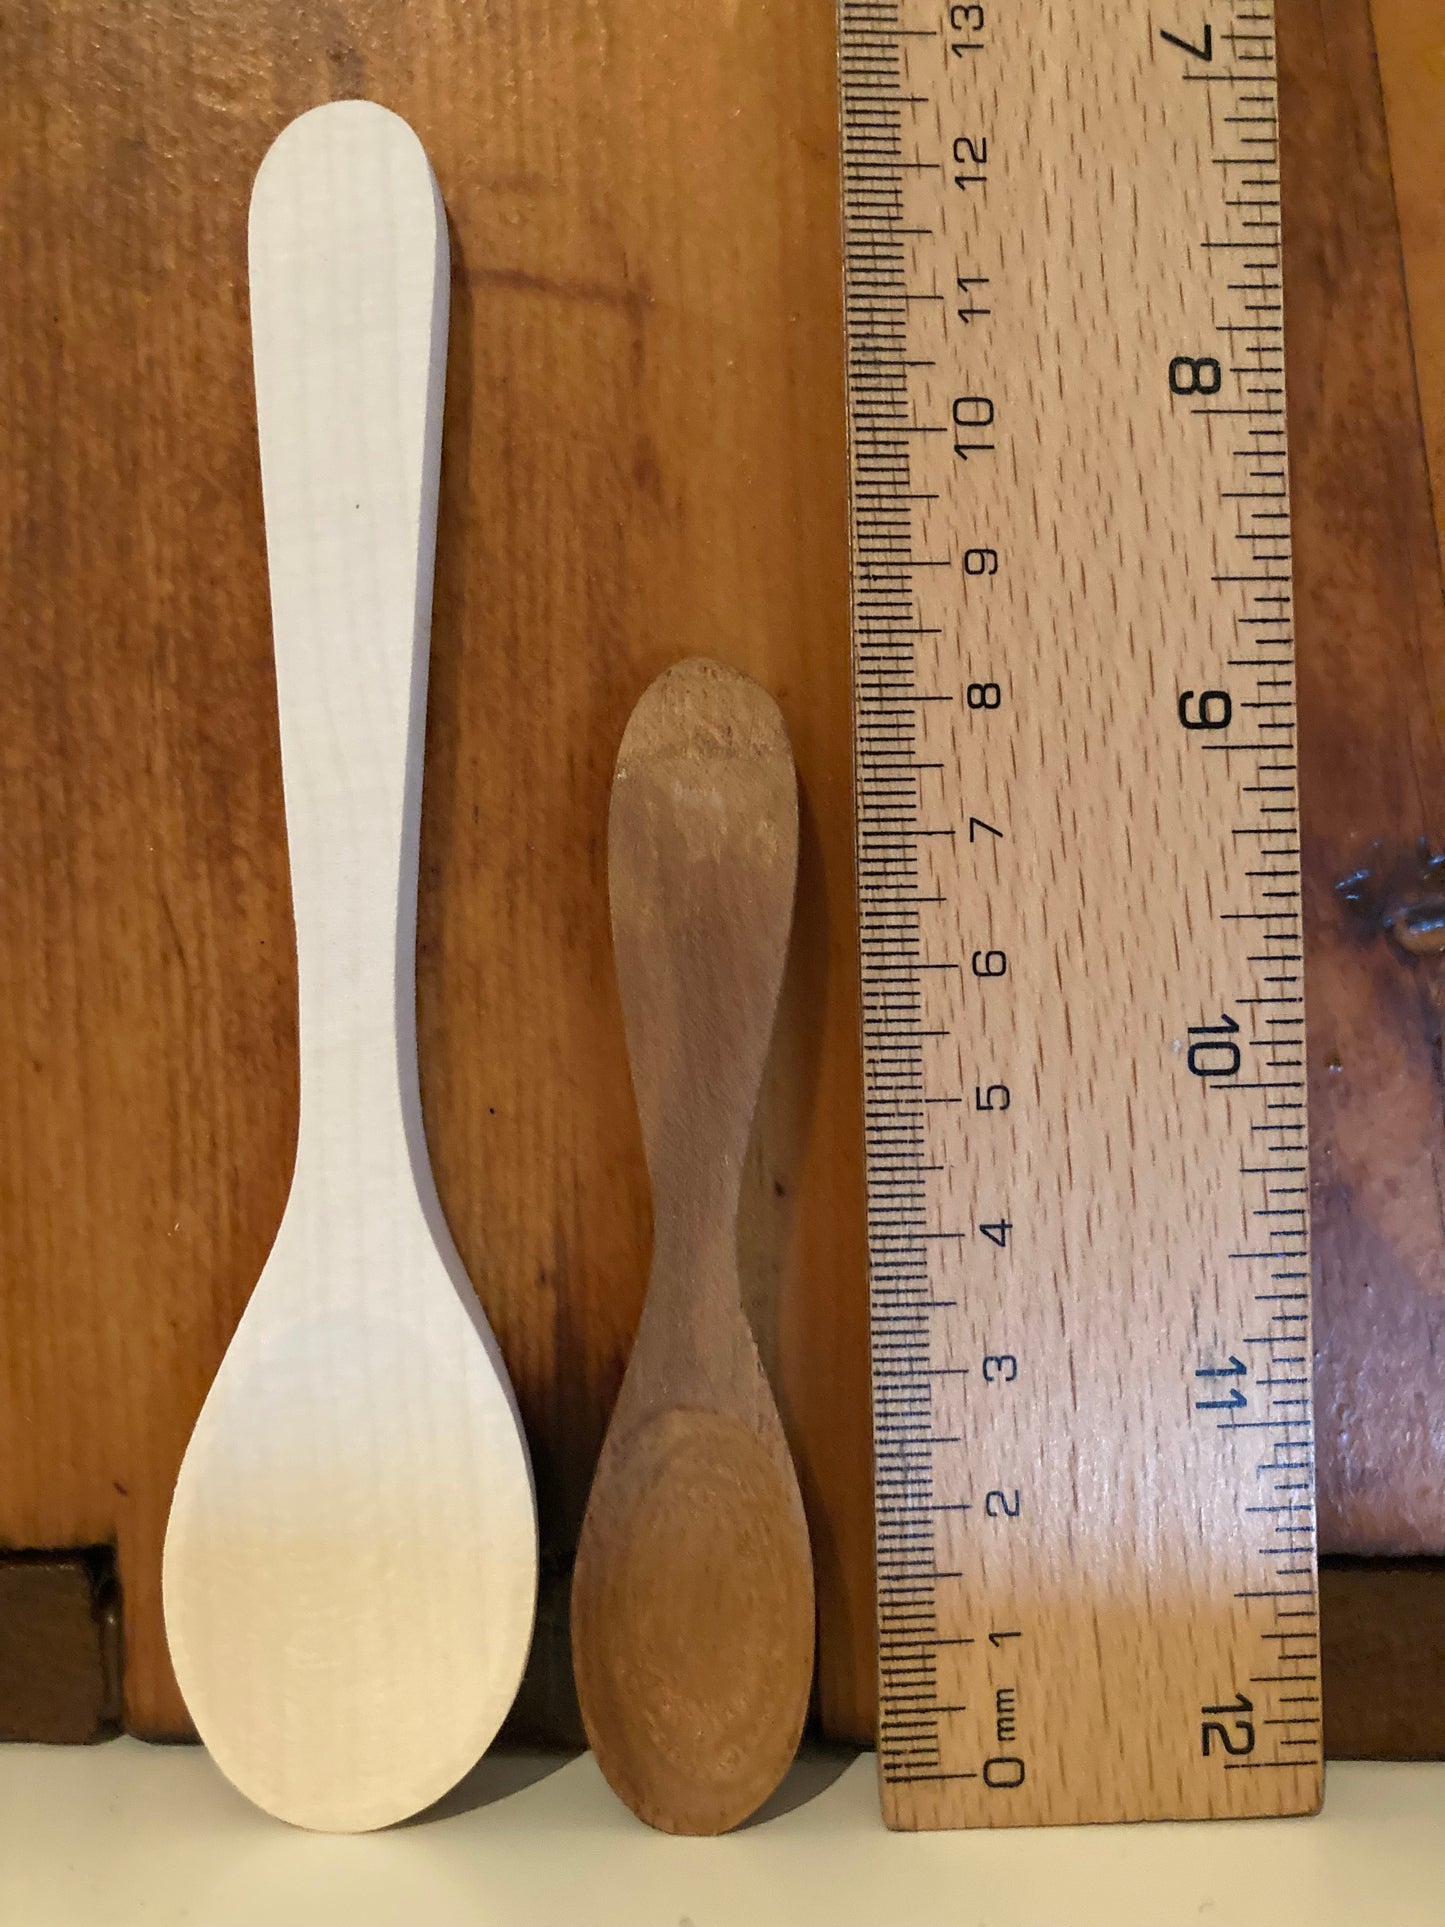 WOODEN SPOONS for BABY and Waldorf DOLLS, all 3 spoons!